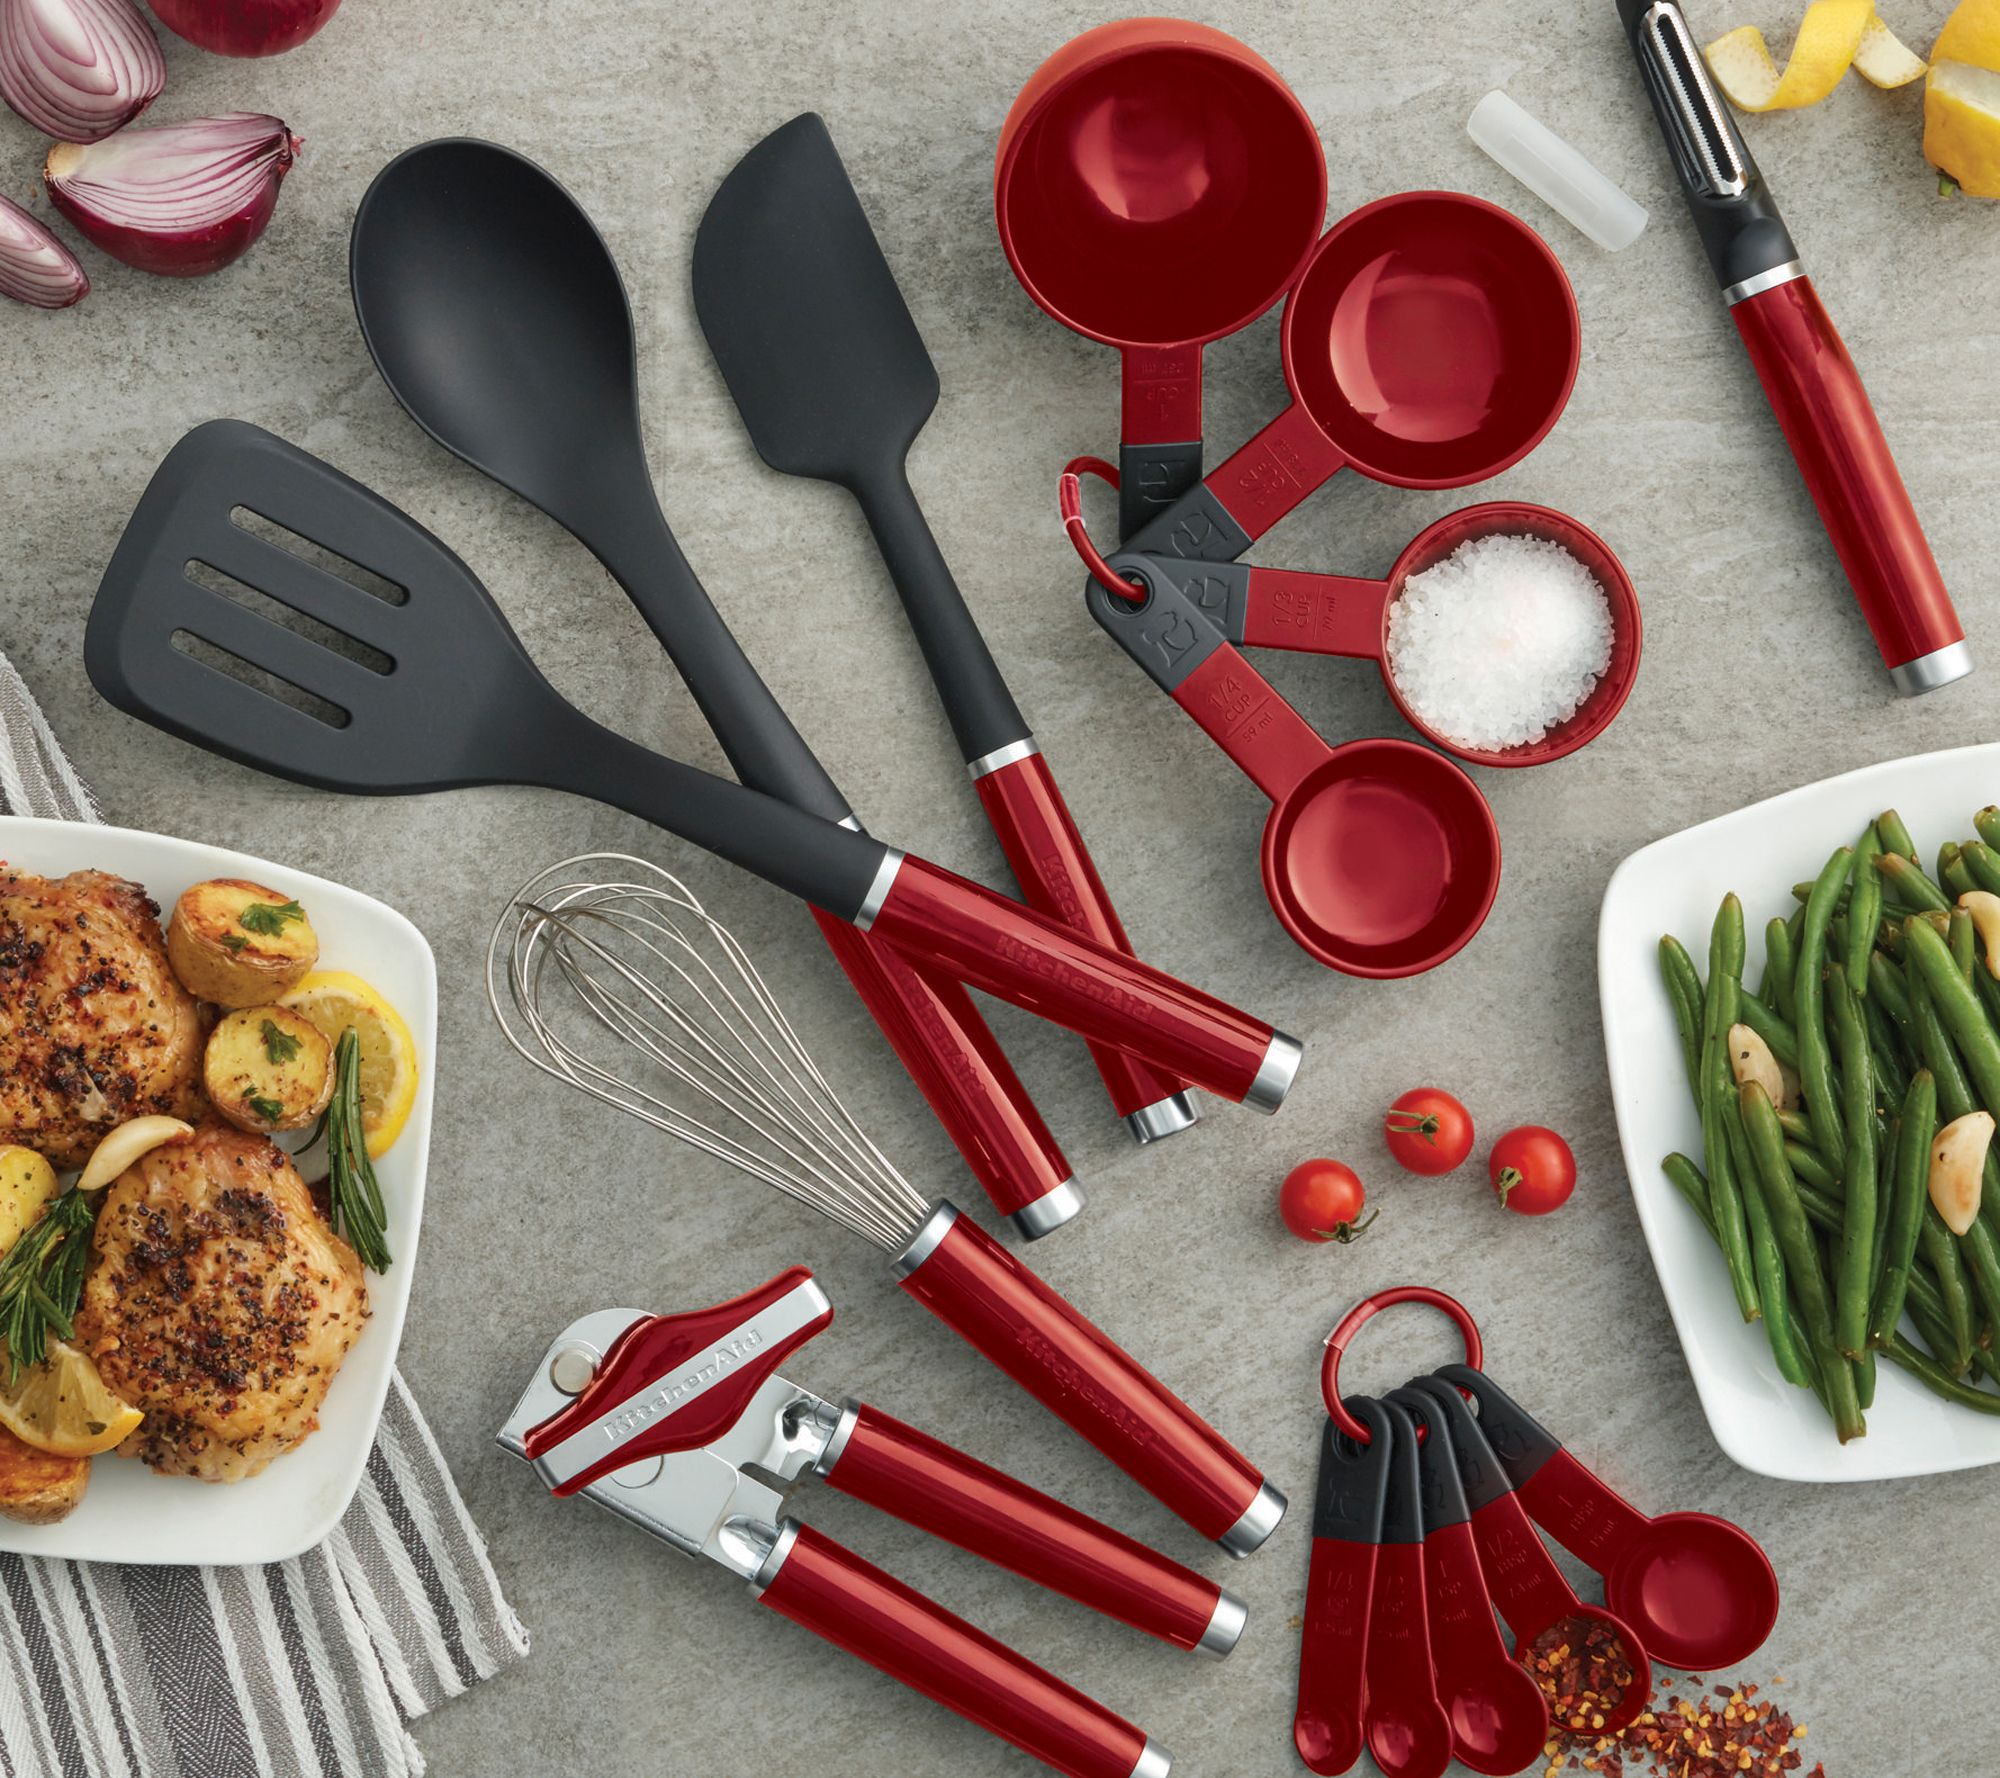 Unique Red Kitchen Accessories And Gadgets